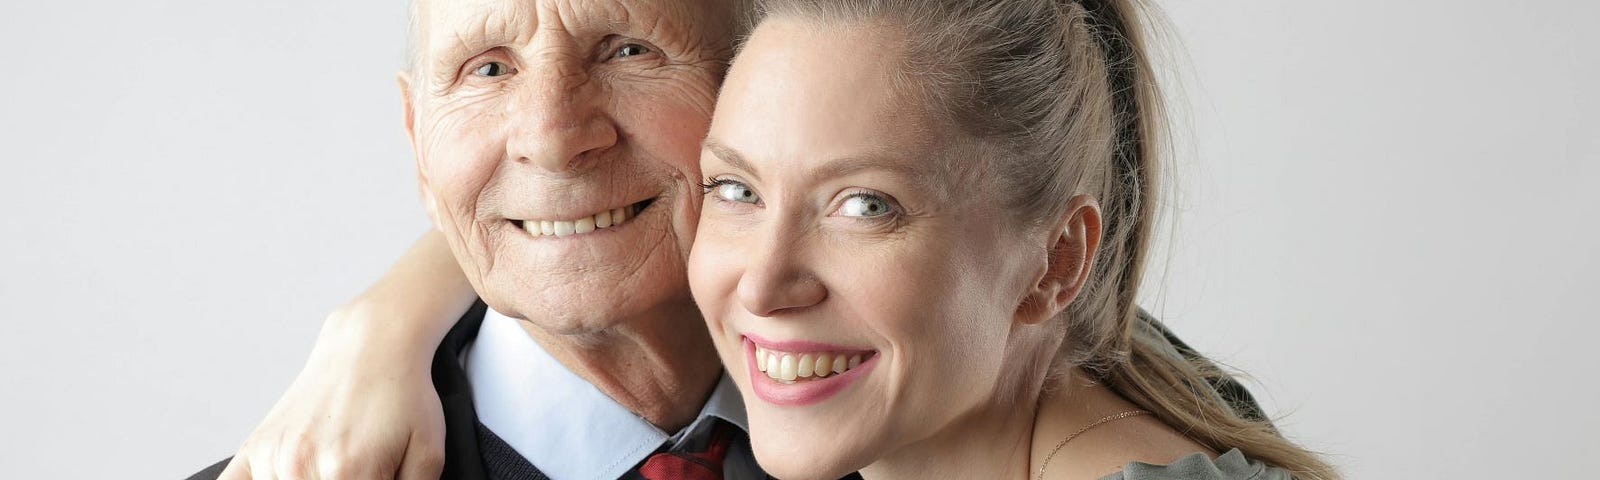 An attractive young woman has her arm around the shoulders of a well-dressed elderly man and both are smiling.